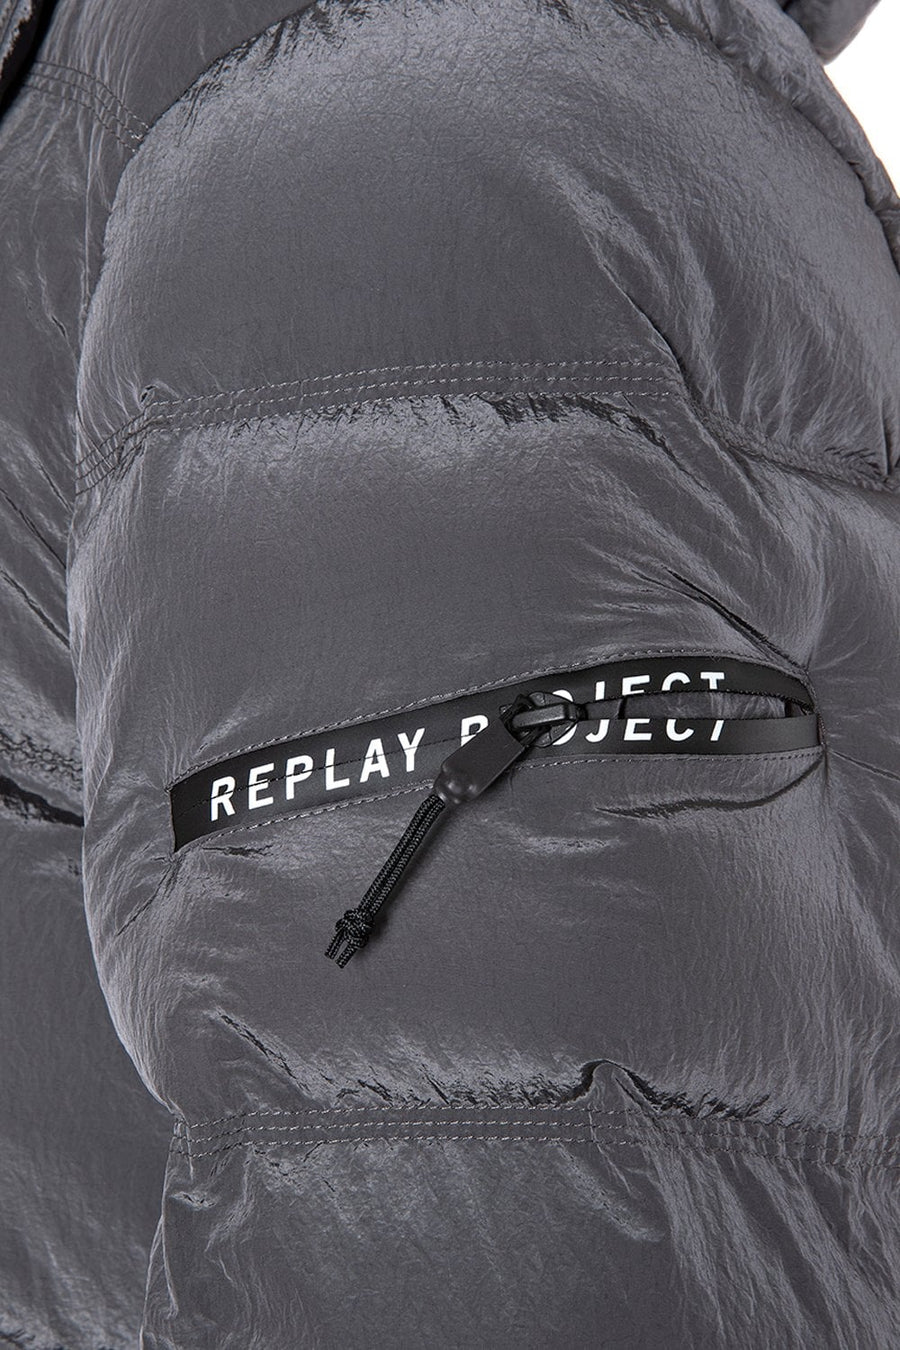 Buy the Replay Long Reflective Jacket in Grey at Intro. Spend £50 for free UK delivery. Official stockists. We ship worldwide.